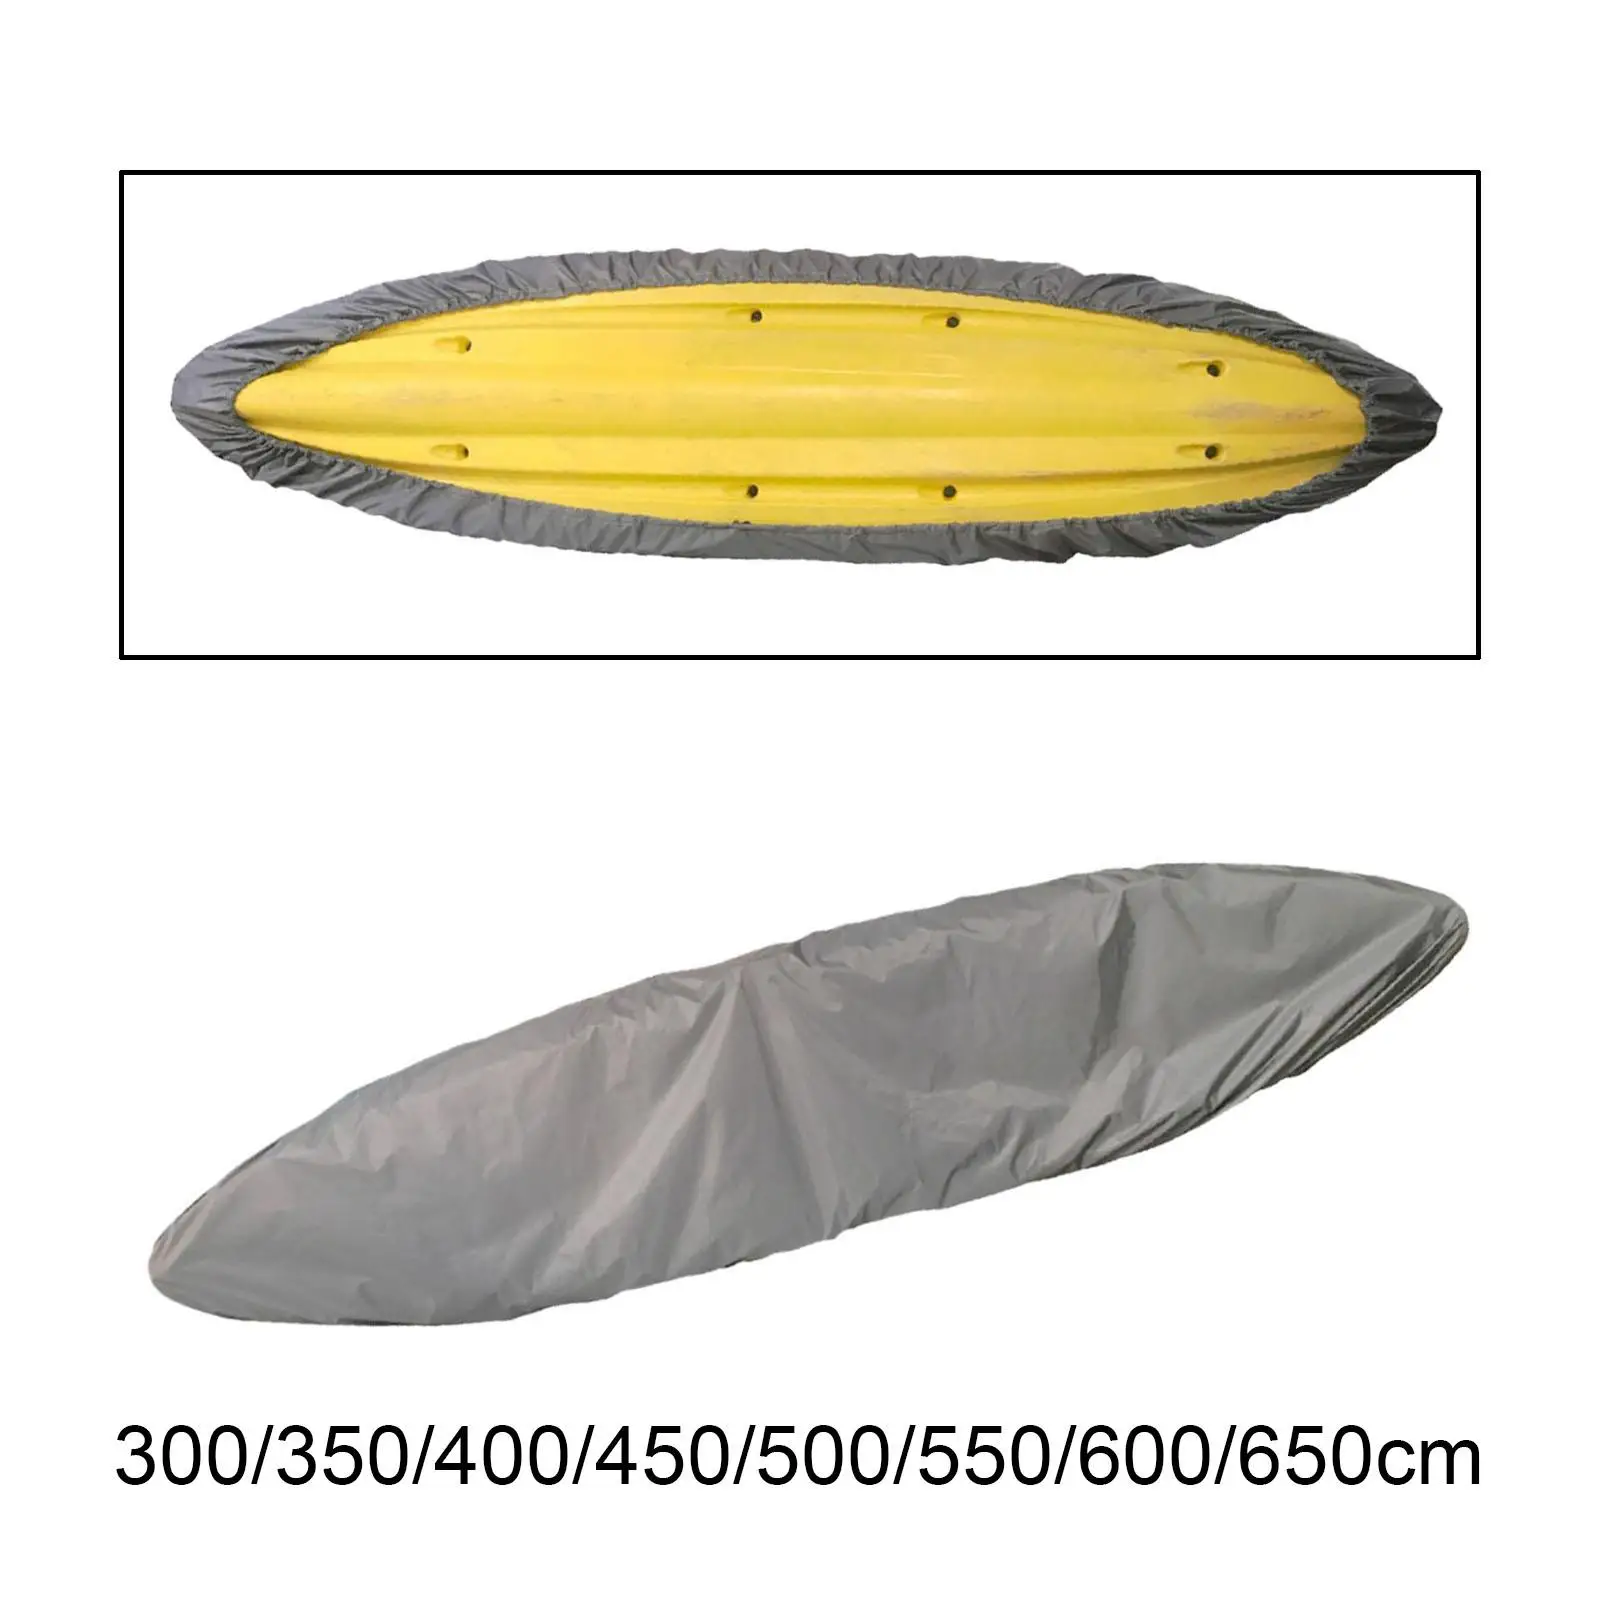 Boat Dust Cover Waterproof Canoe Cover Transport Protector Kayak Cover